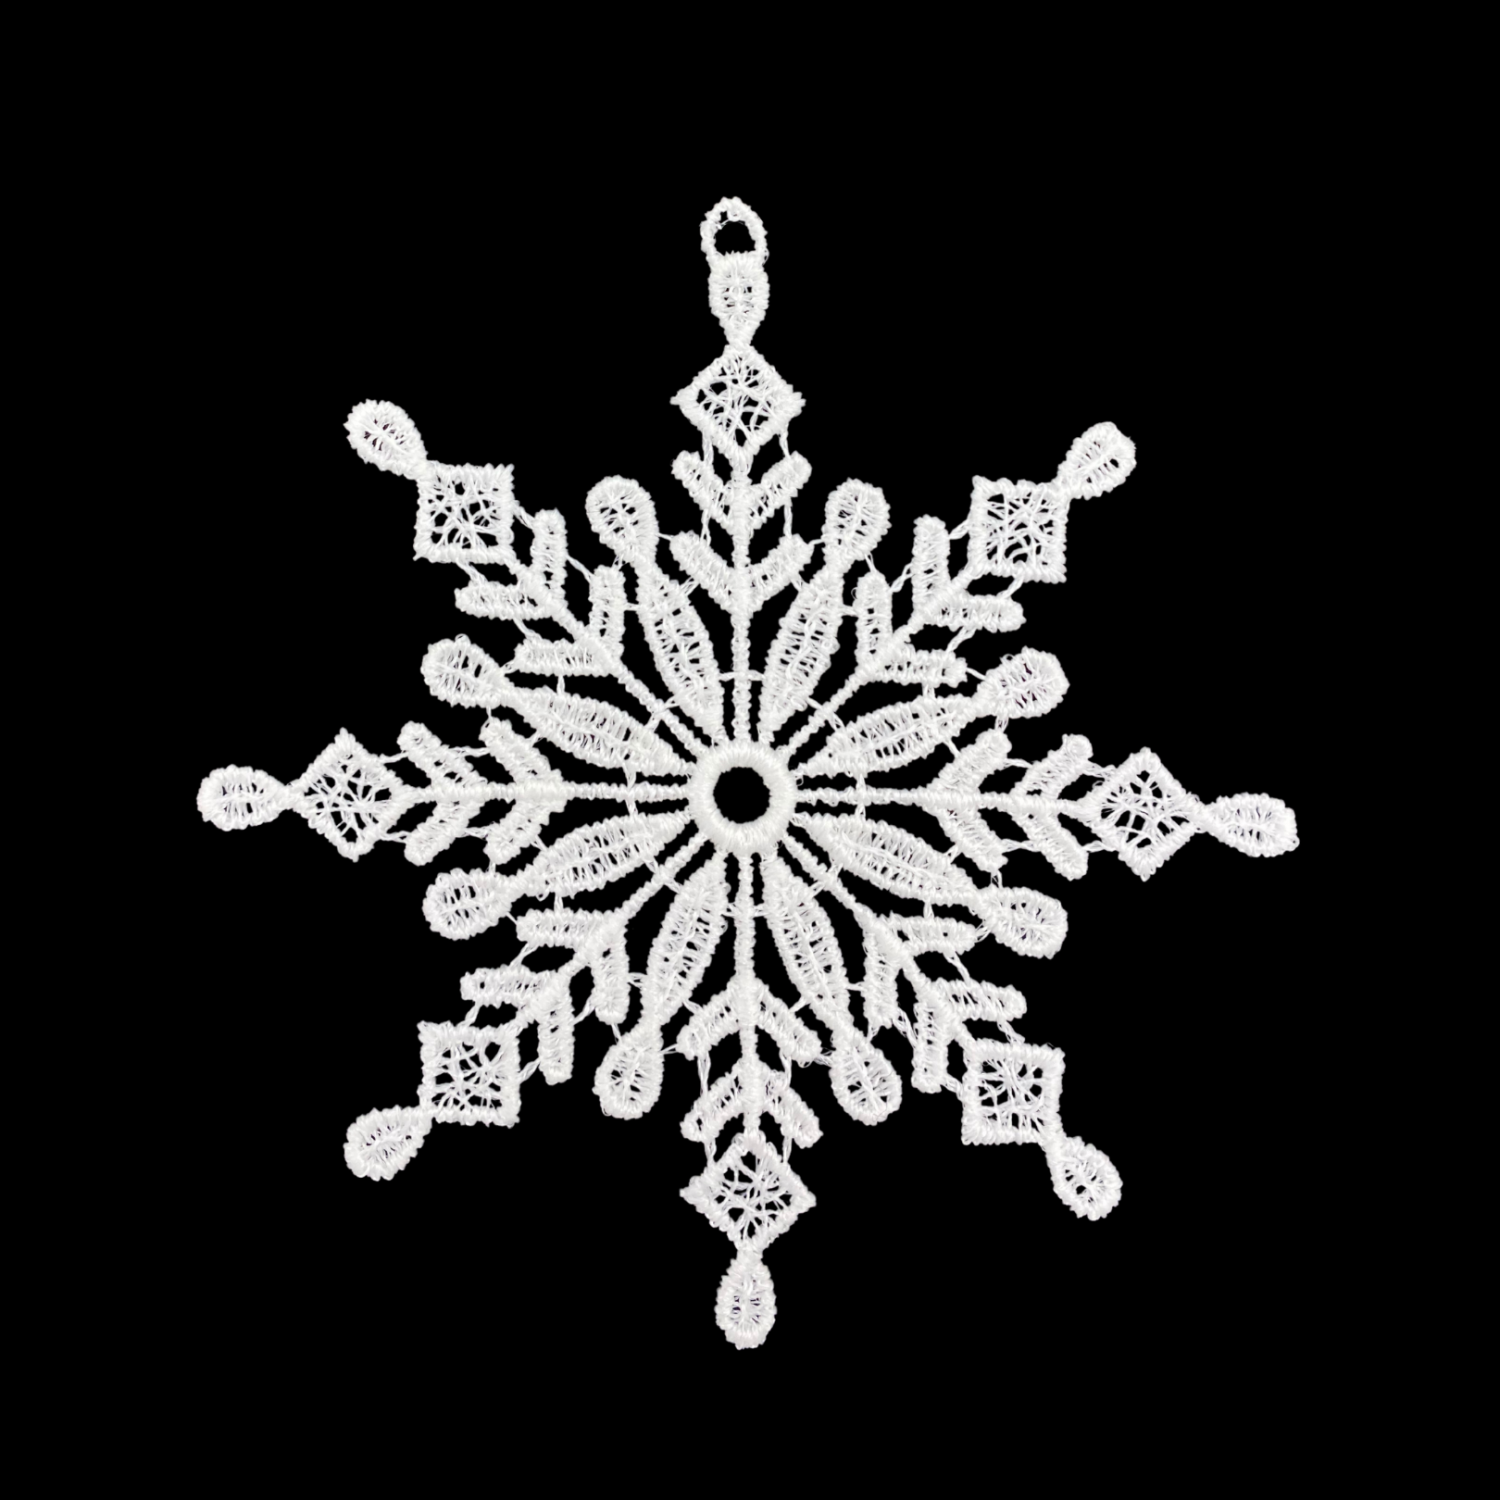 Lace Snowstar with Eight Tips Ornament by Stickservice Patrick Vogel